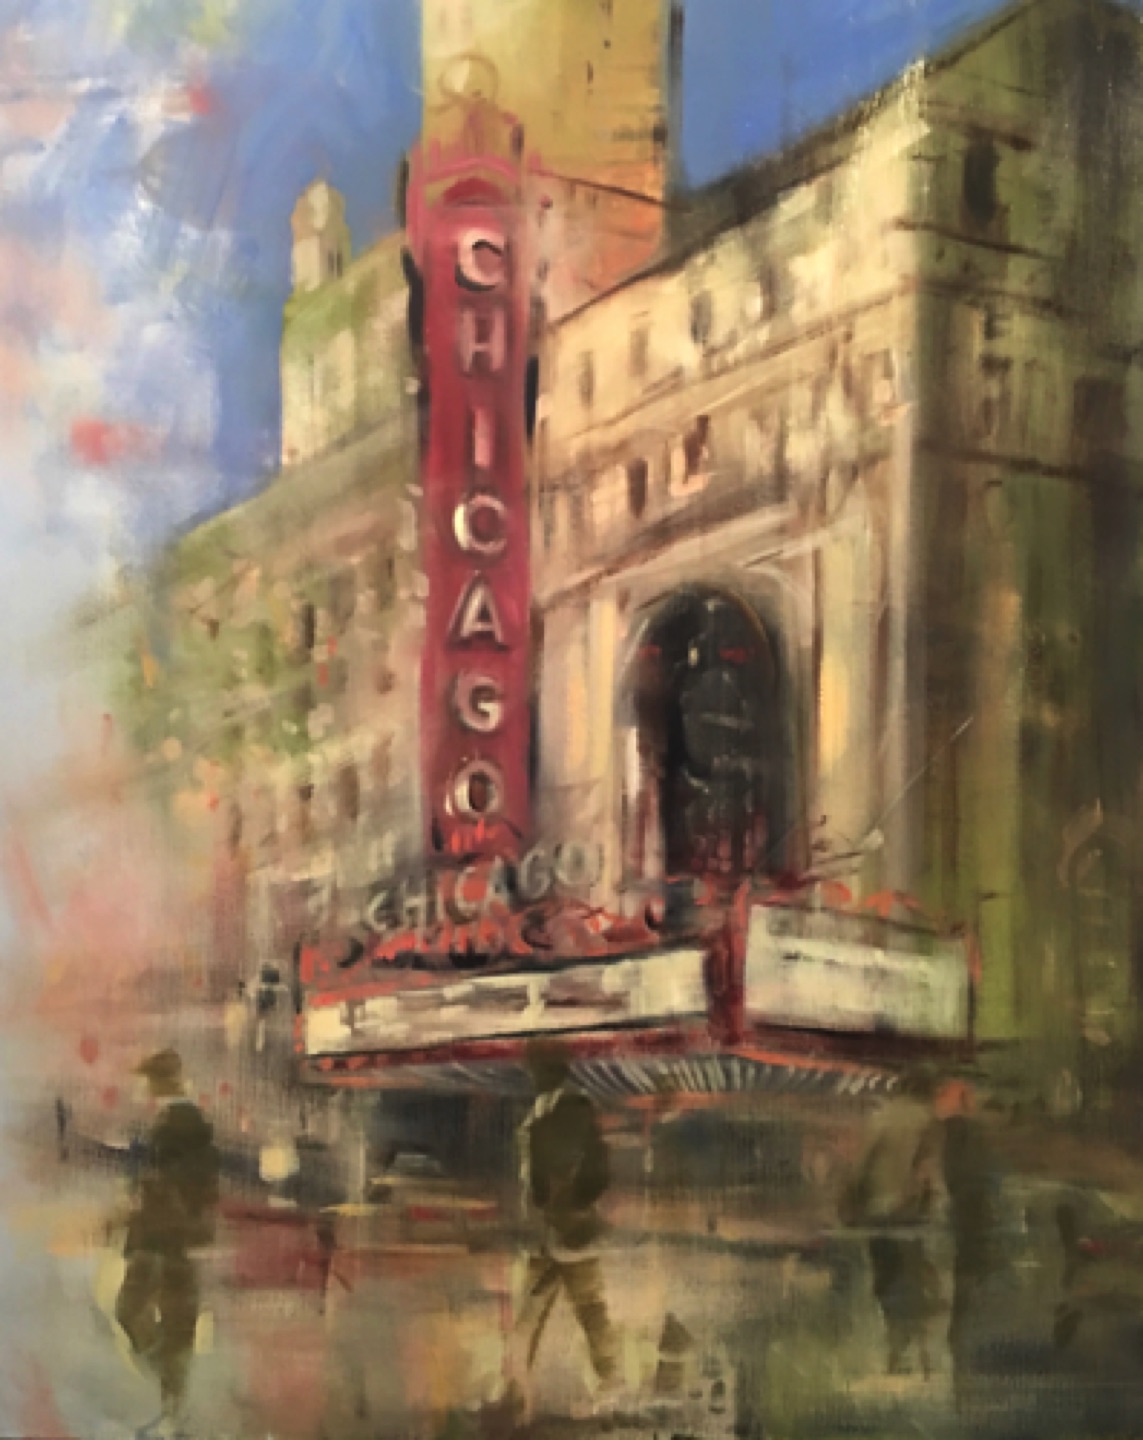 Gregg Chadwick
Chicago Theater
30"x24"oil on linen 2019
Private Collection, Chicago